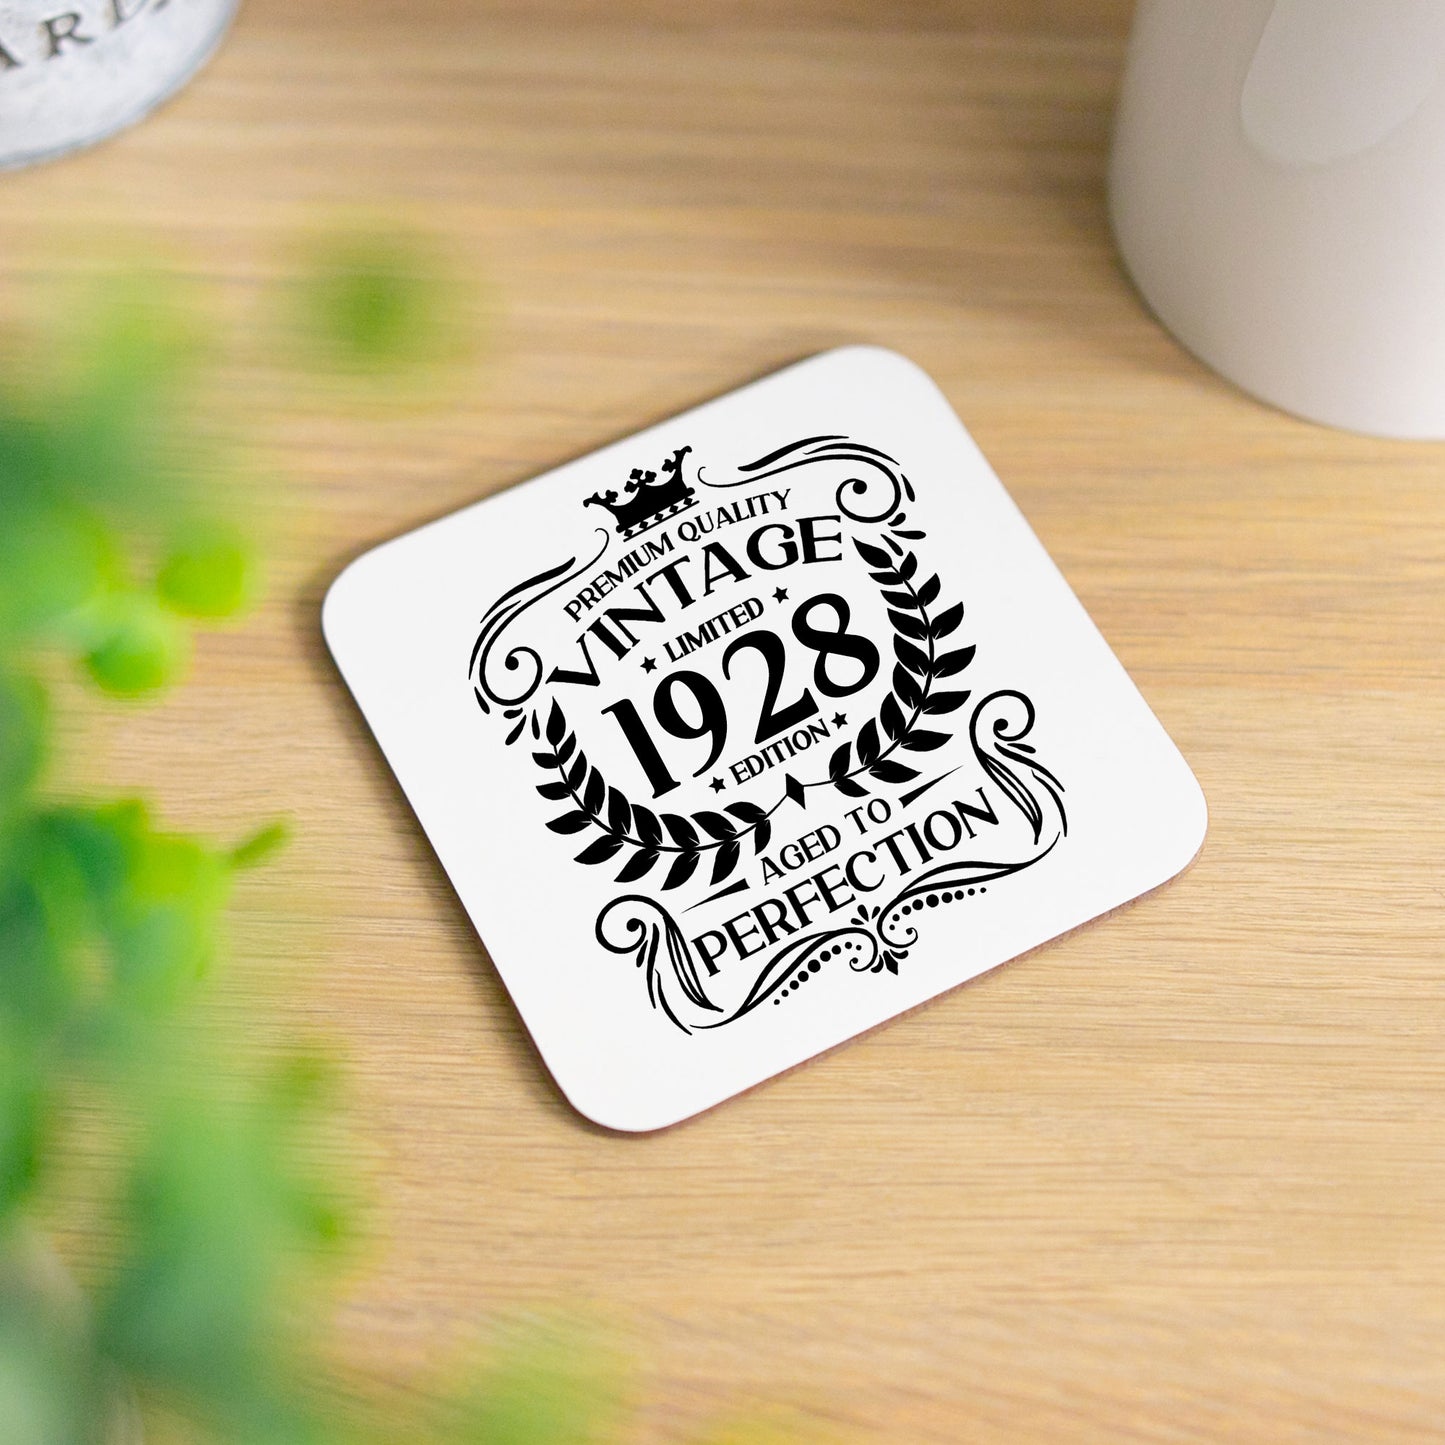 Vintage 1928 95th Birthday Engraved Wine Glass Gift  - Always Looking Good - Glass & Printed Coaster  